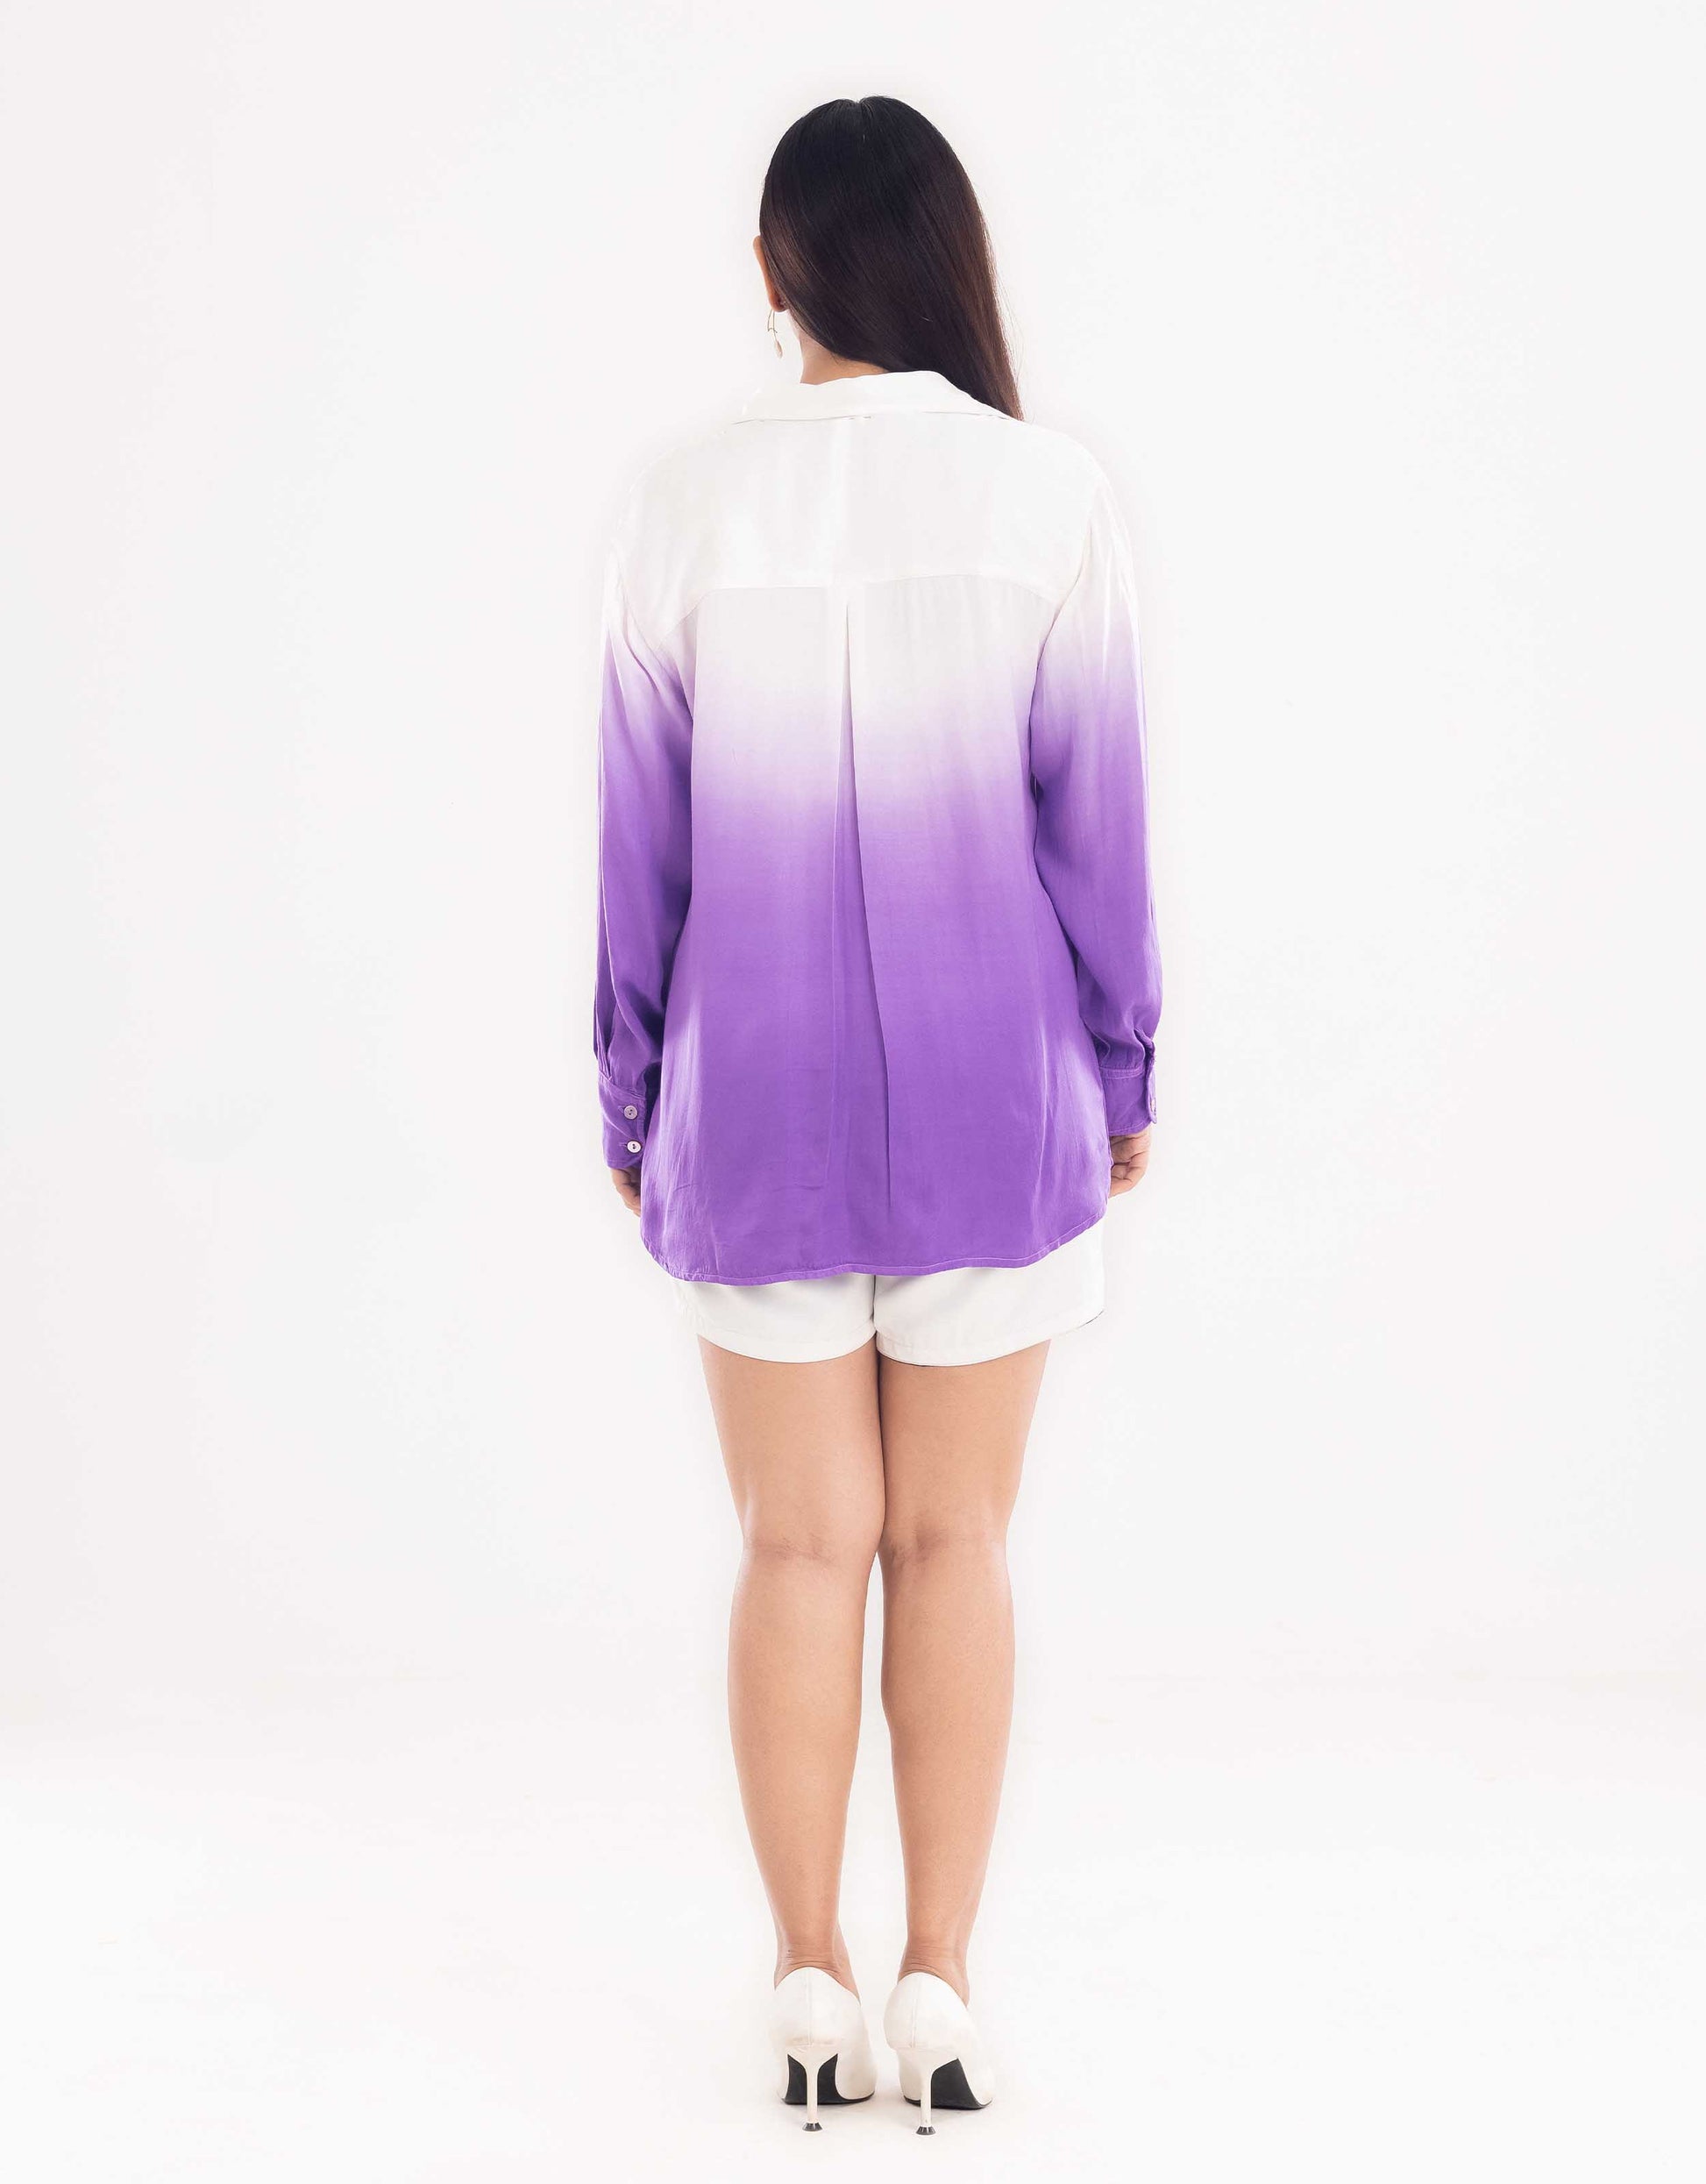 Back view display of Hueloom's Cosmopolitan capsule with oversized shirt, bandeau top and shorts in purple.